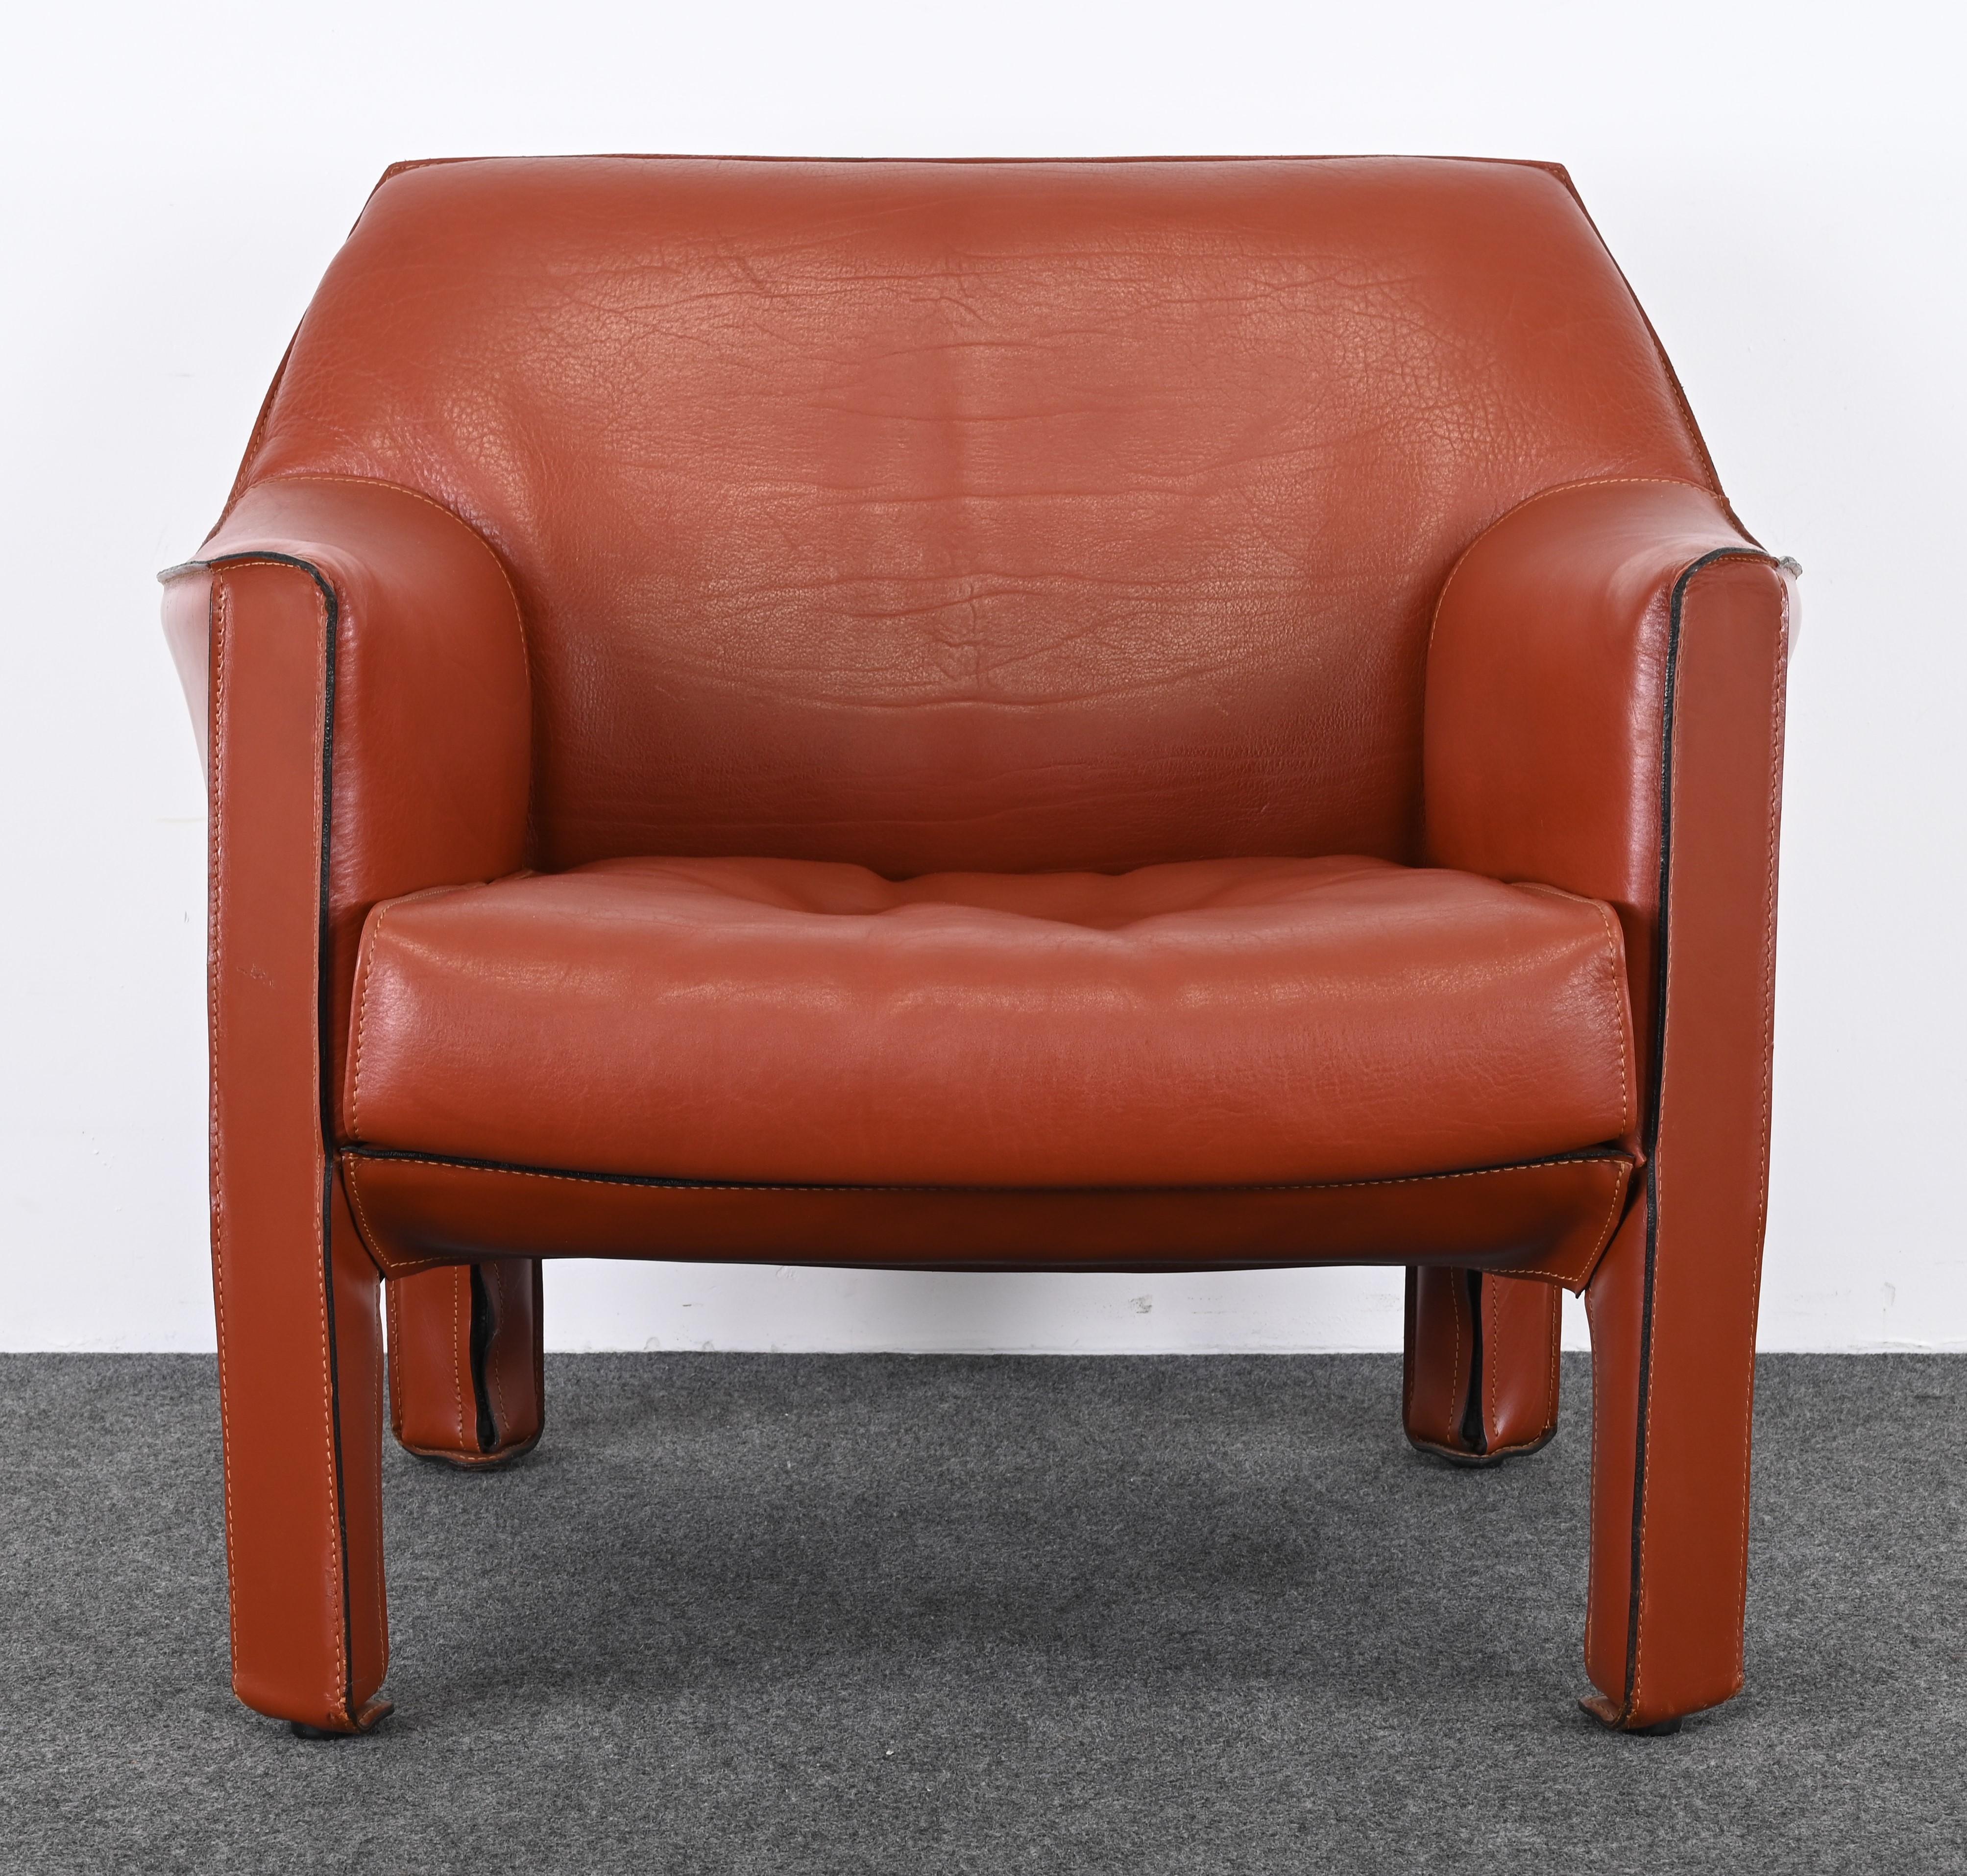 Italian Cassina Cab Chair 415 Designed by Mario Bellini, No Longer in Production